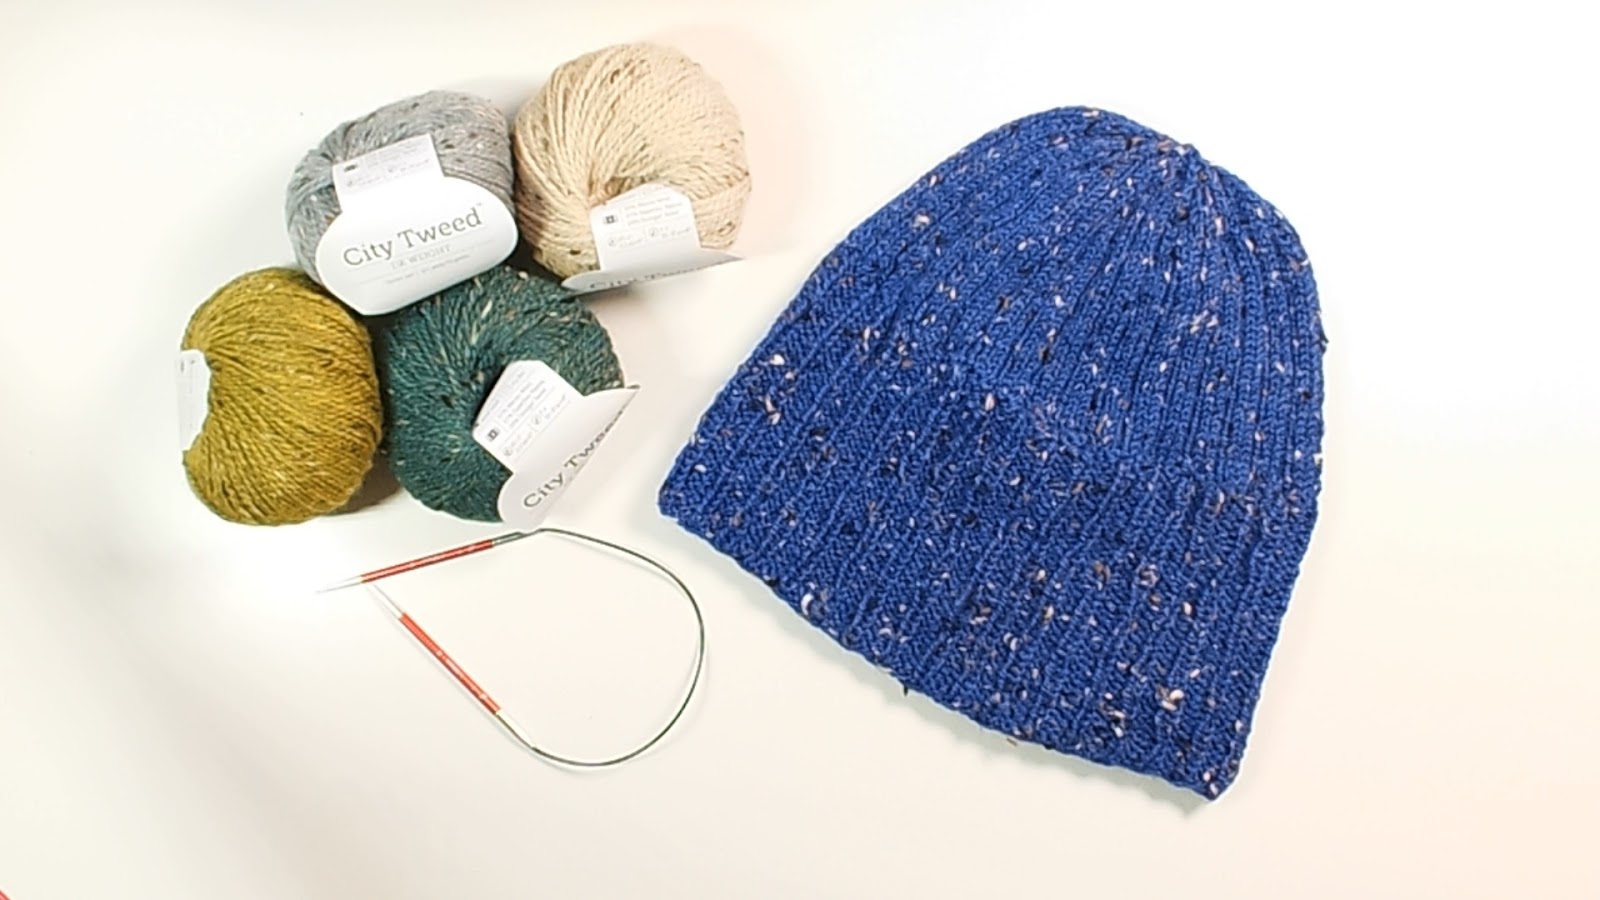 On a table are four balls of the City Tweed DK Yarn in different colors, a pair of 16 inch size 7/4.5mm knitting needles, and the Every Day Knit Hat laying flat with the brim folded down - Marly Bird